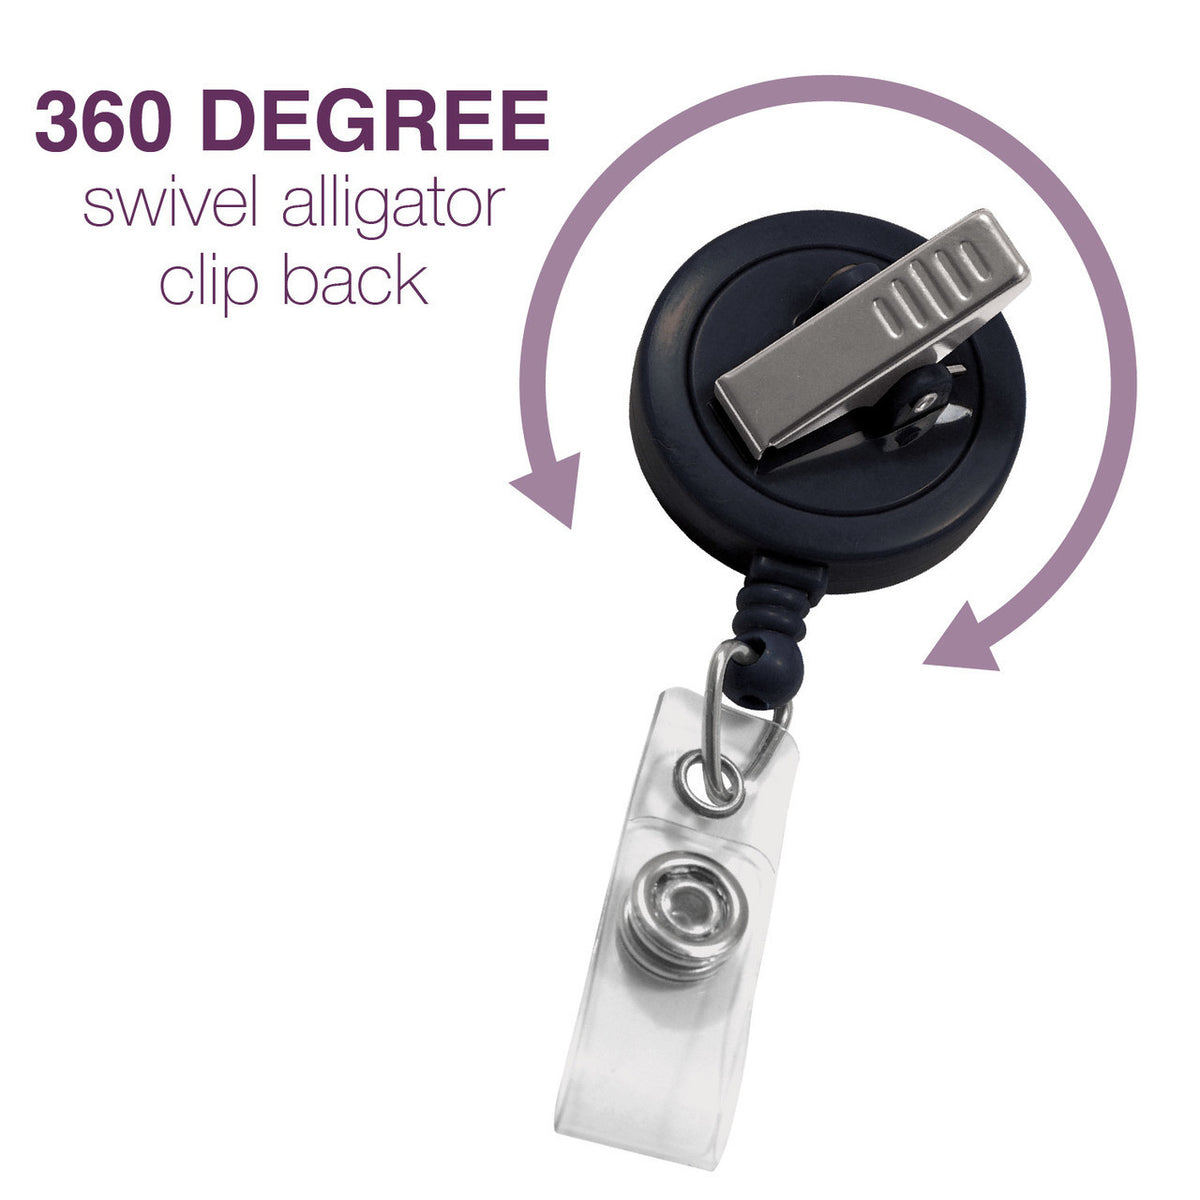 Lung Squad Retractable ID Badge Reel